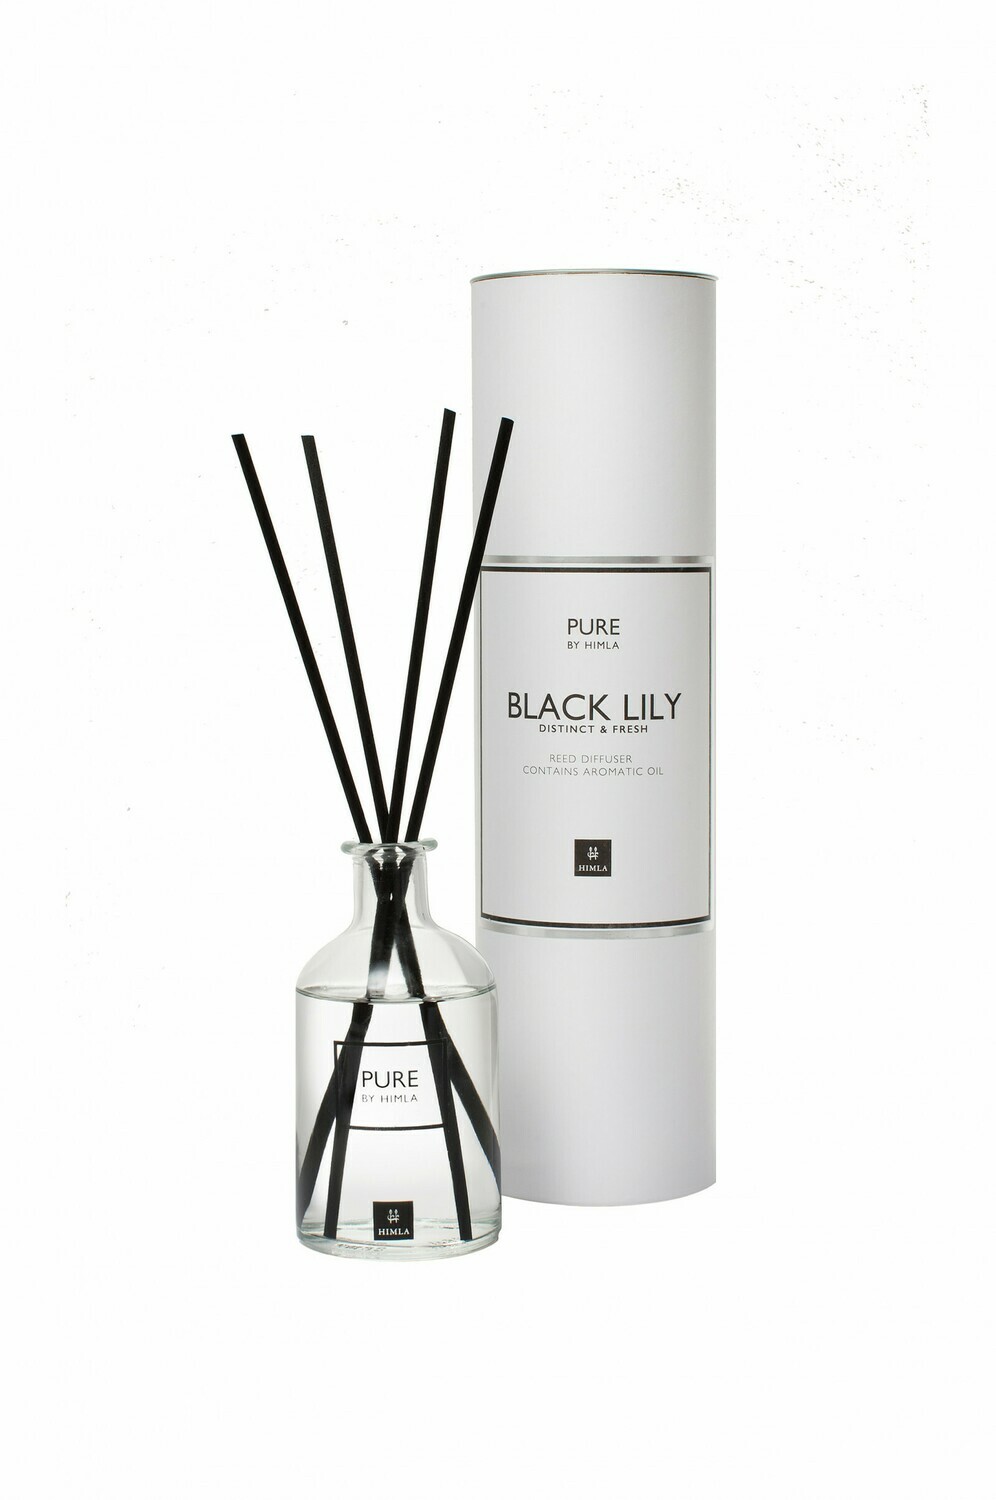 Pure REED DIFFUSER Black Lily 200ml